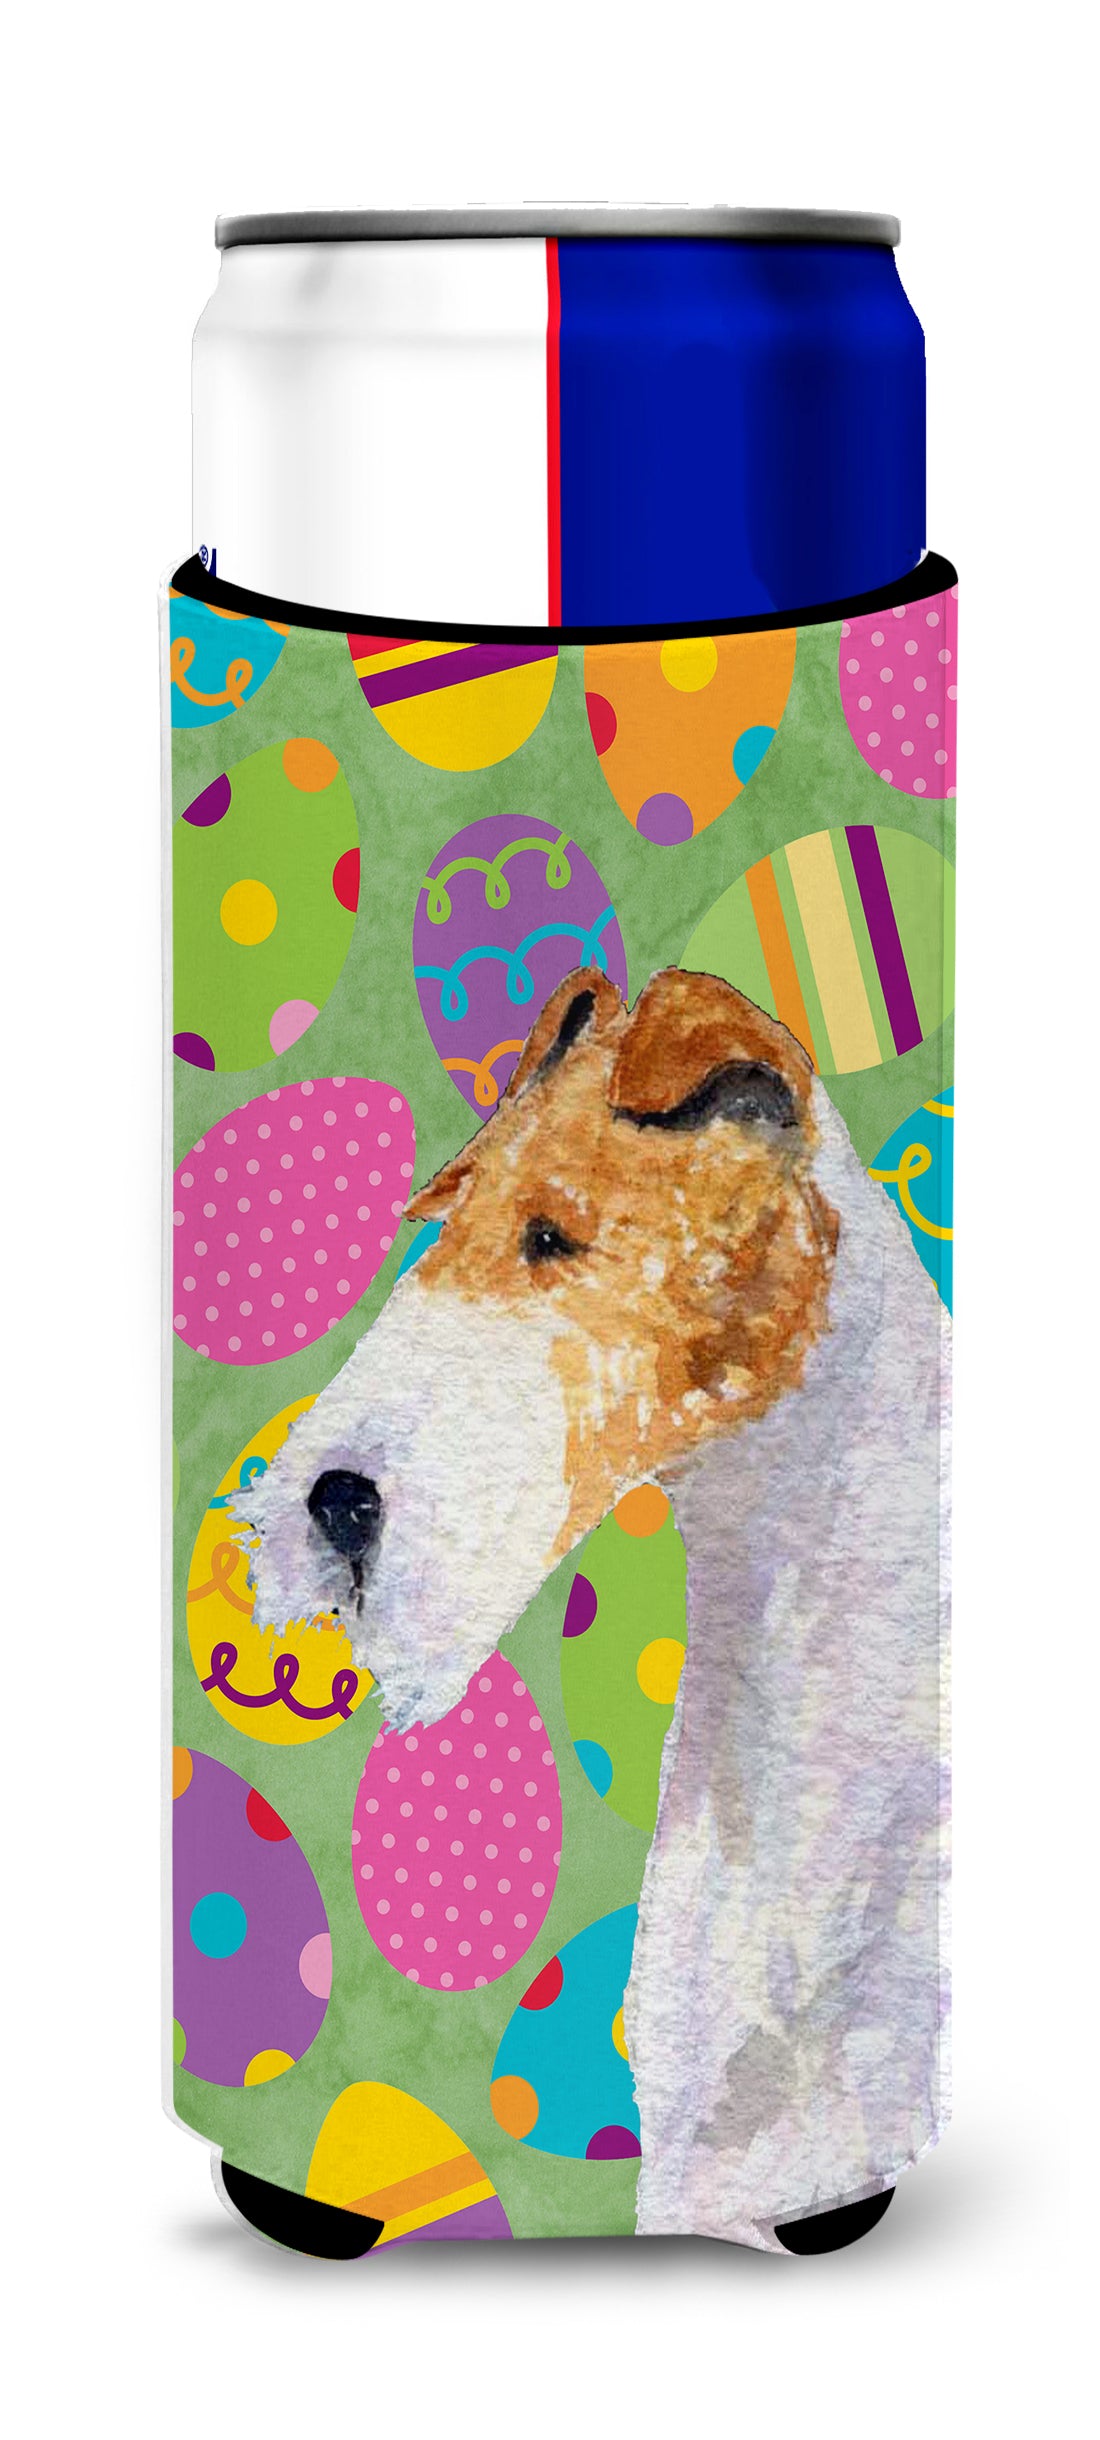 Fox Terrier Easter Eggtravaganza Ultra Beverage Insulators for slim cans SS4823MUK.